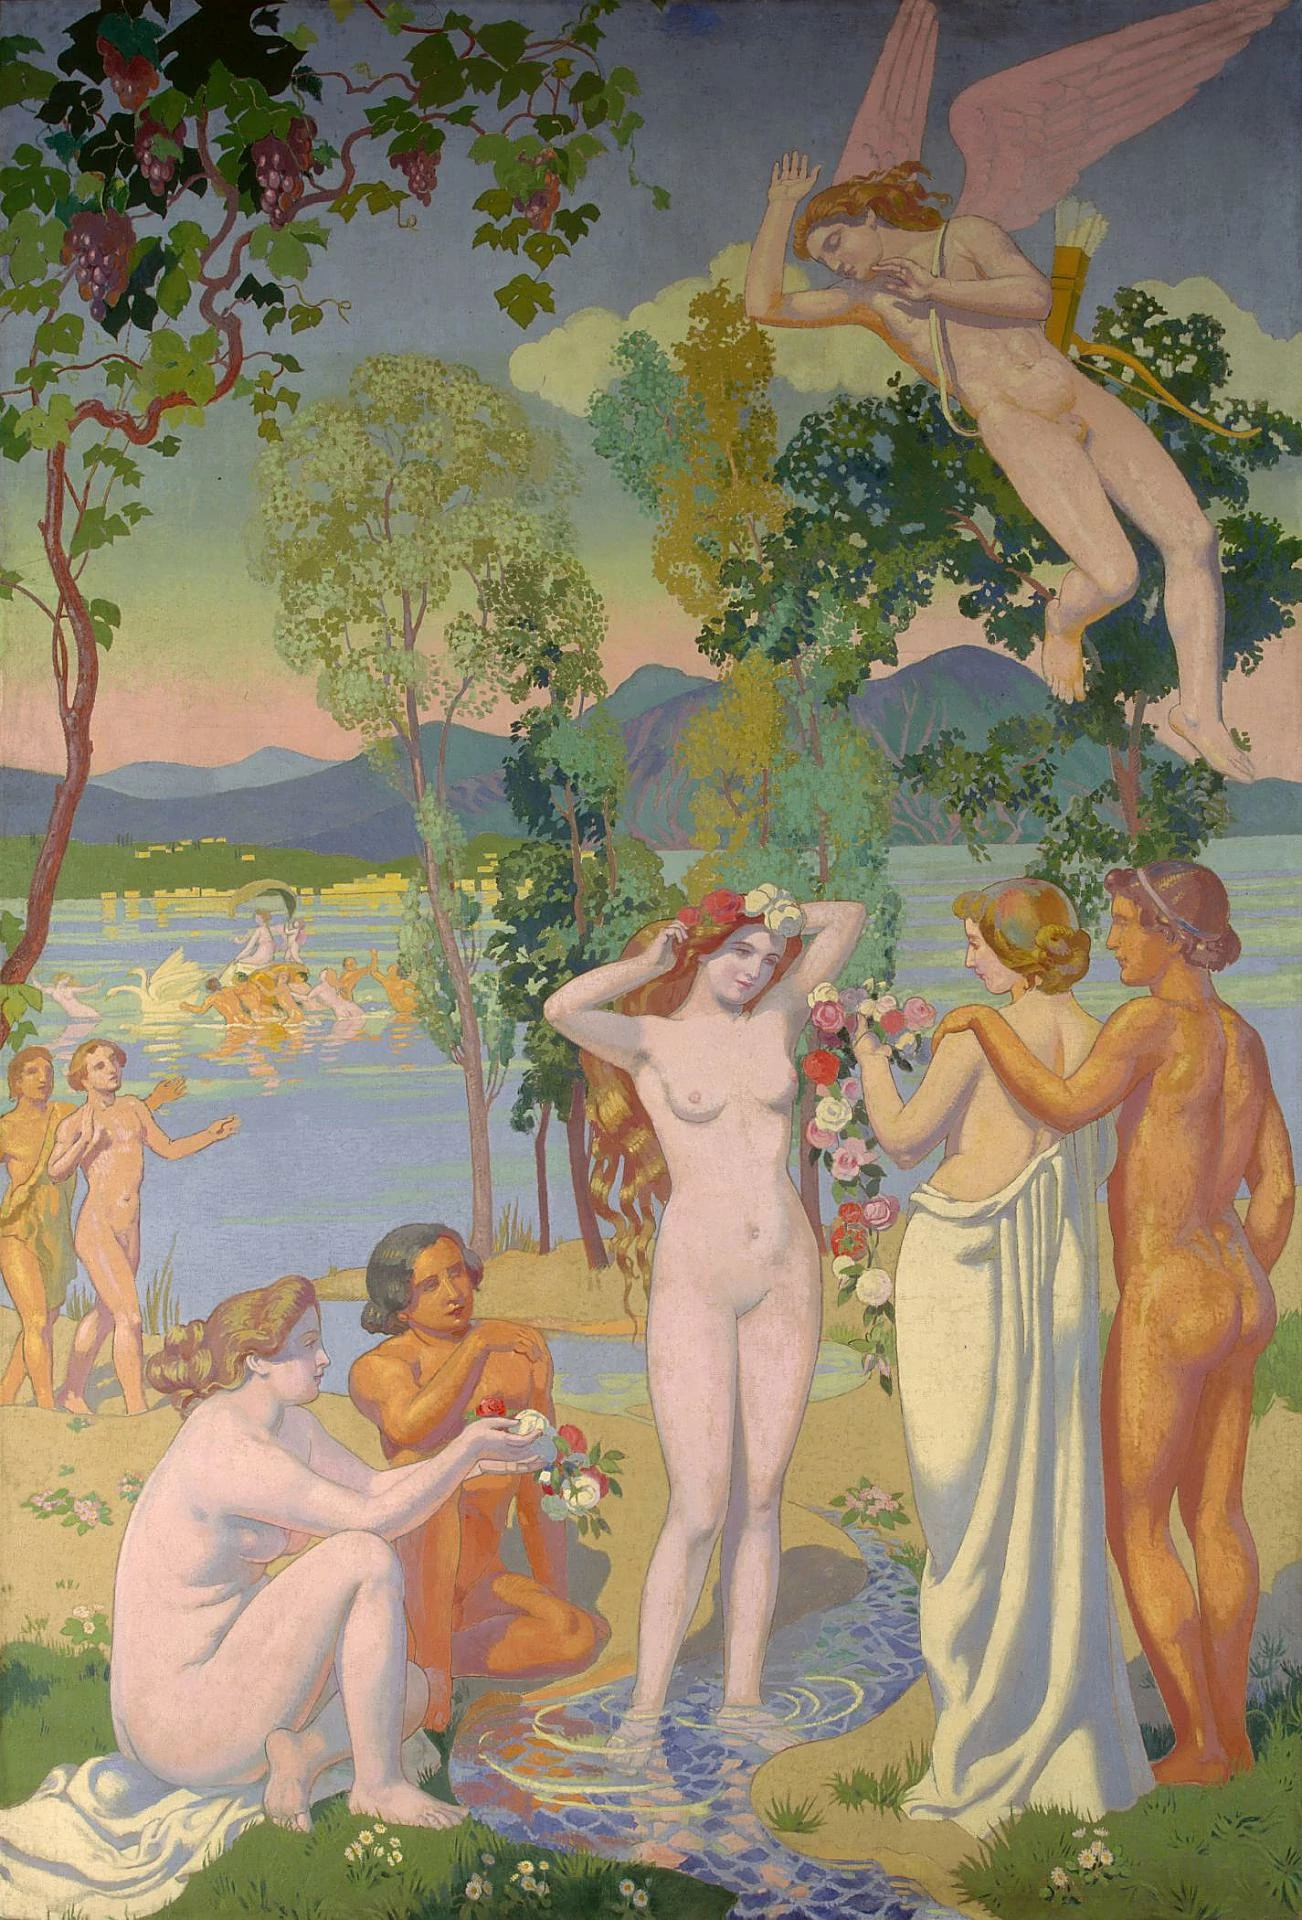 Psyche Panel 1 — Eros is Struck by Psyche's Beauty, Maurice Denis